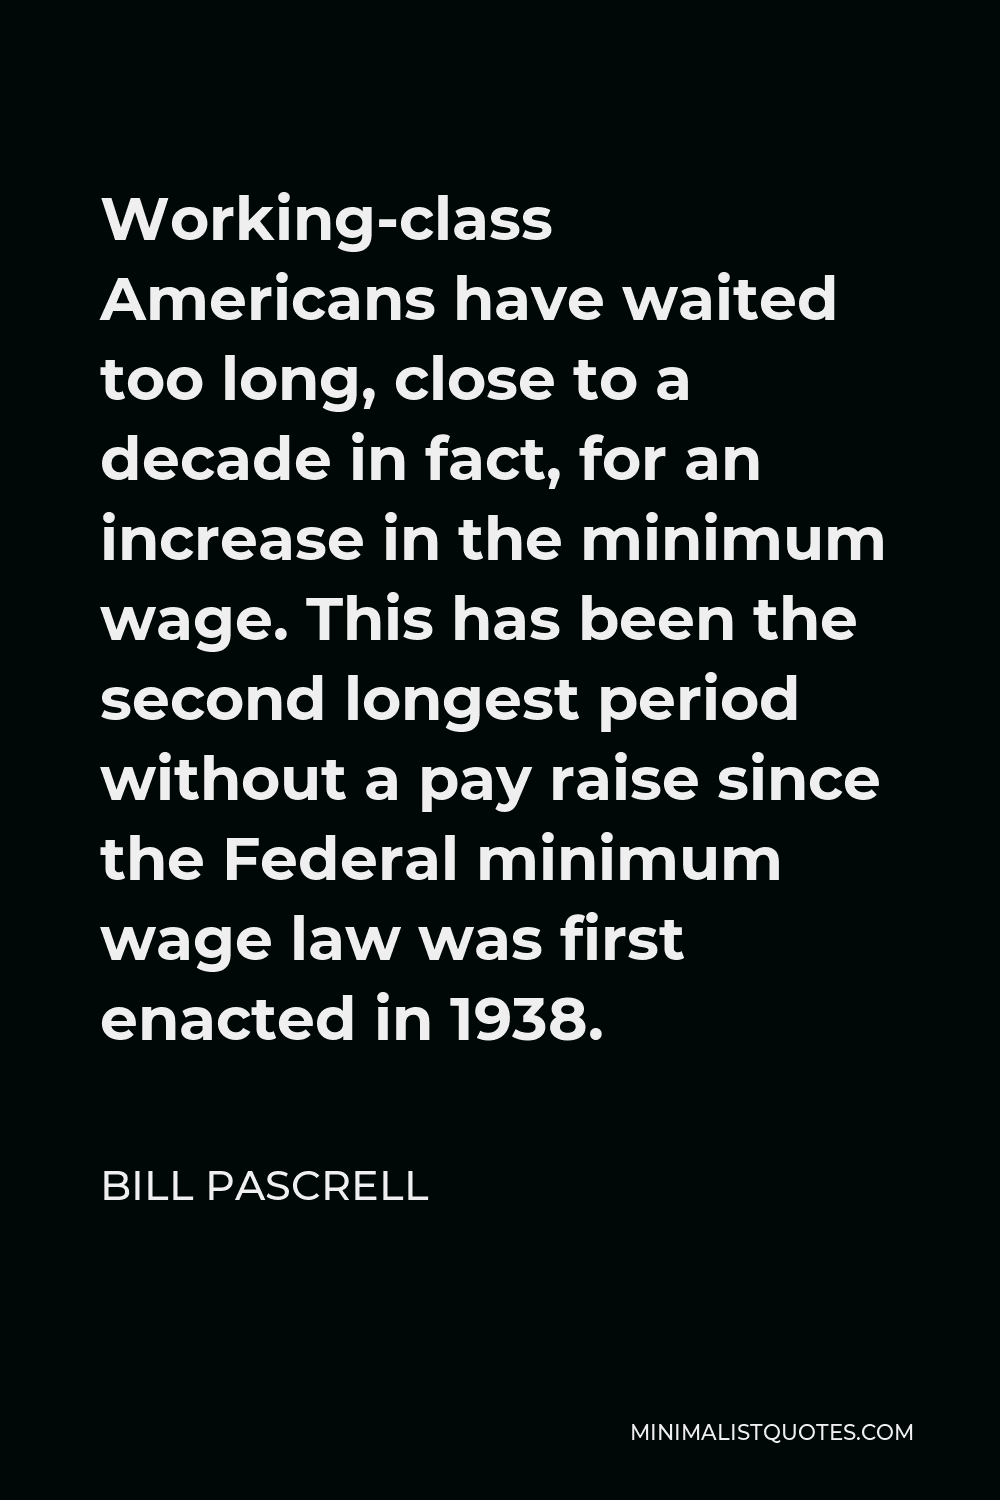 Bill Pascrell Quote - Working-class Americans have waited too long, close to a decade in fact, for an increase in the minimum wage. This has been the second longest period without a pay raise since the Federal minimum wage law was first enacted in 1938.